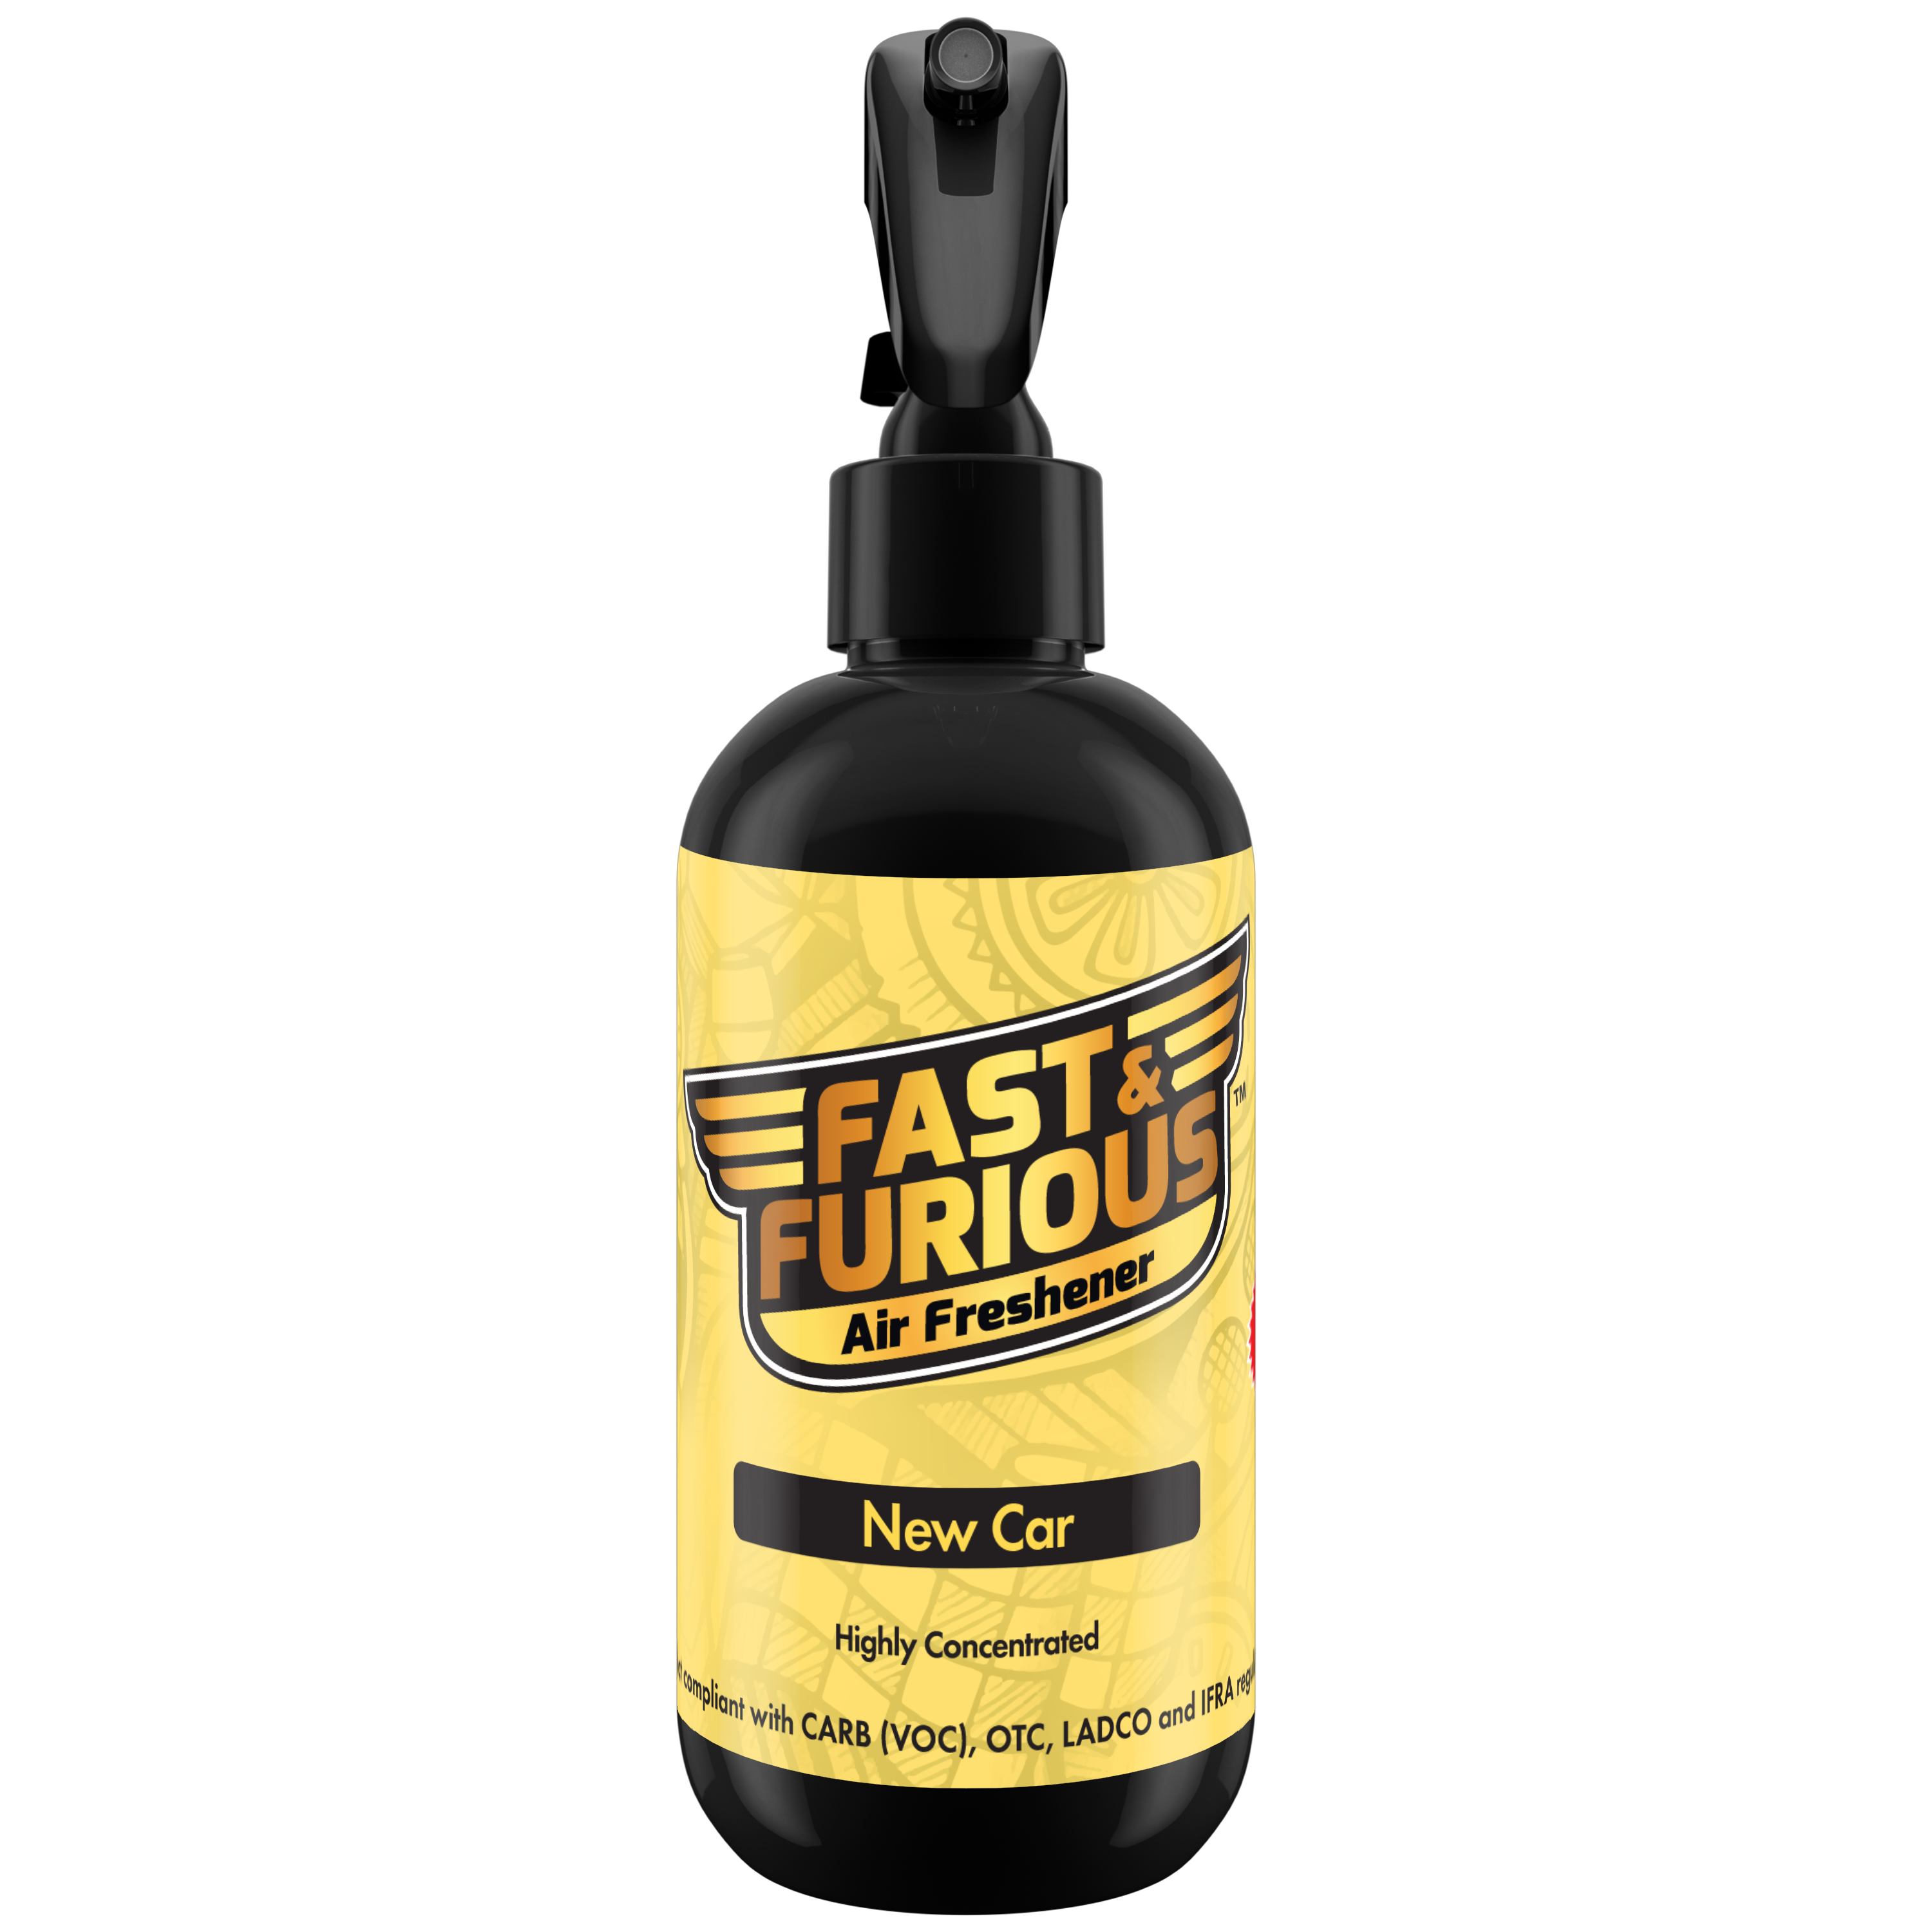 Fast and Furious Air Freshener - New Car Scent 8oz